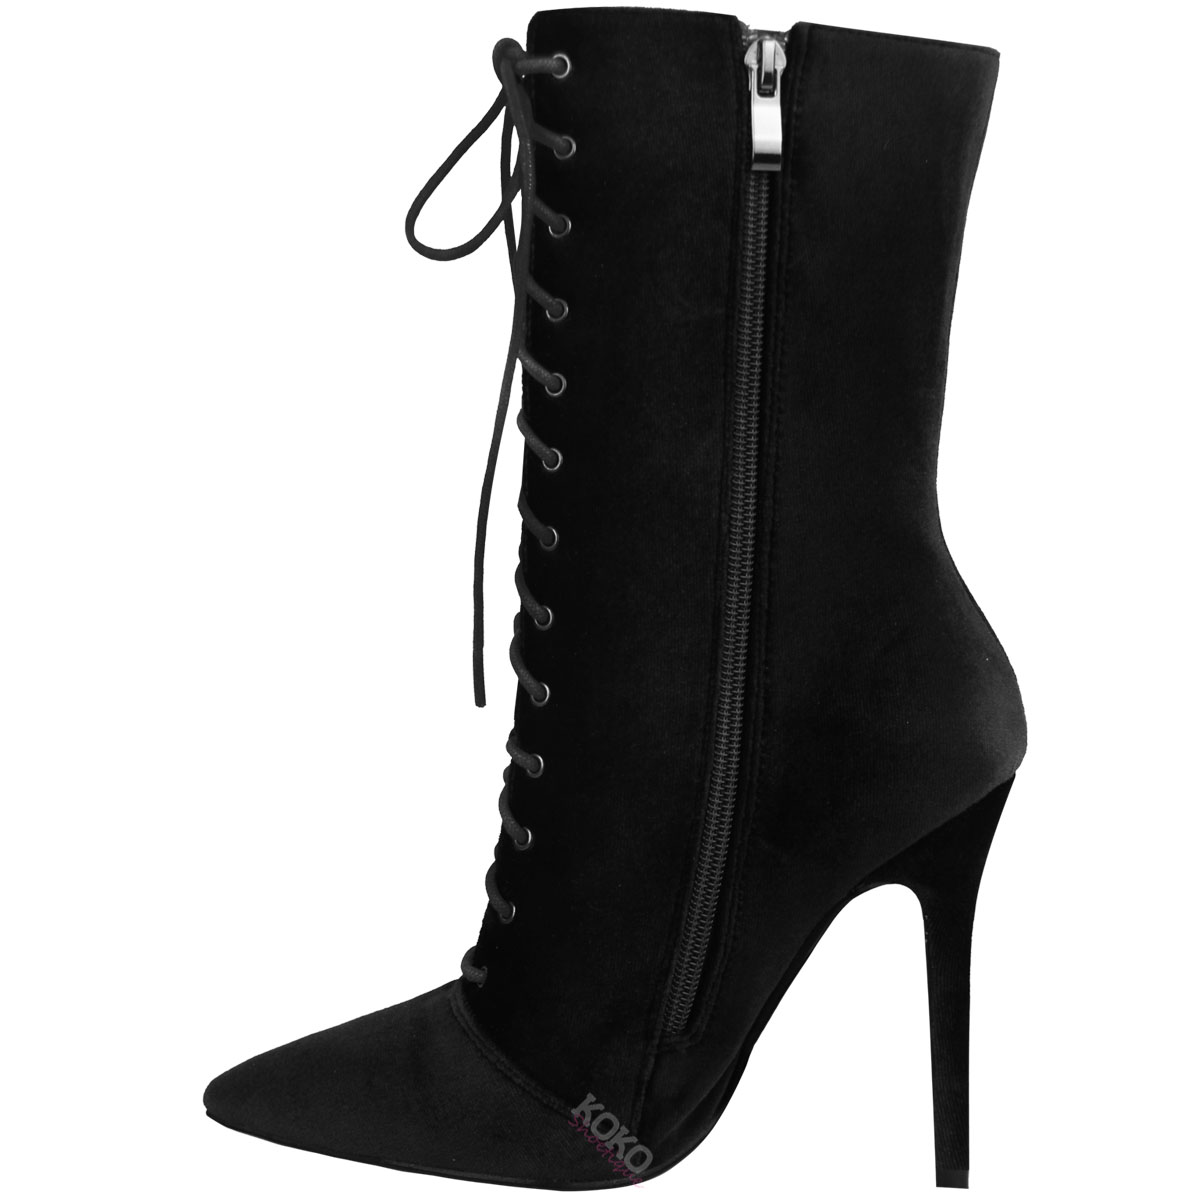 Ladies Womens Lace Up Stretchy High Heel Stiletto Ankle Boots Party ...